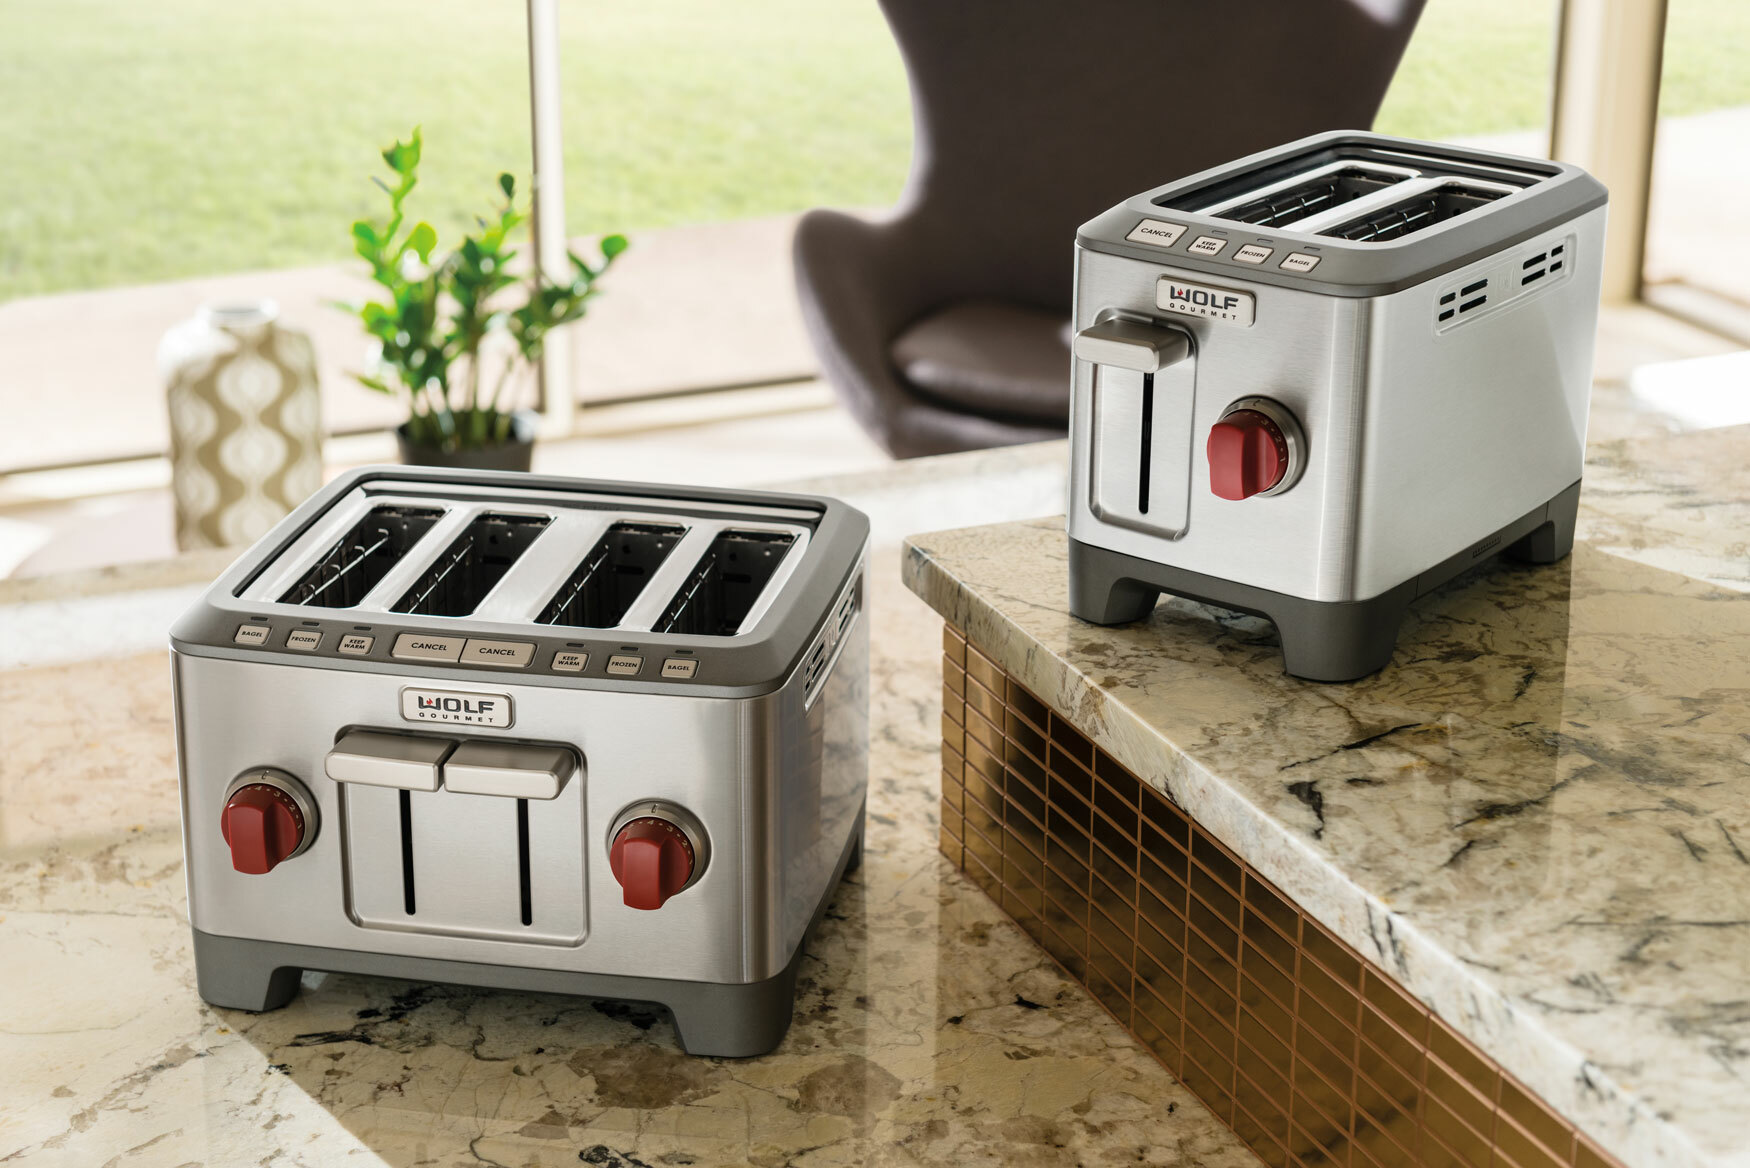 https://storables.com/wp-content/uploads/2023/08/12-best-wolf-toaster-for-2023-1691025994.jpg